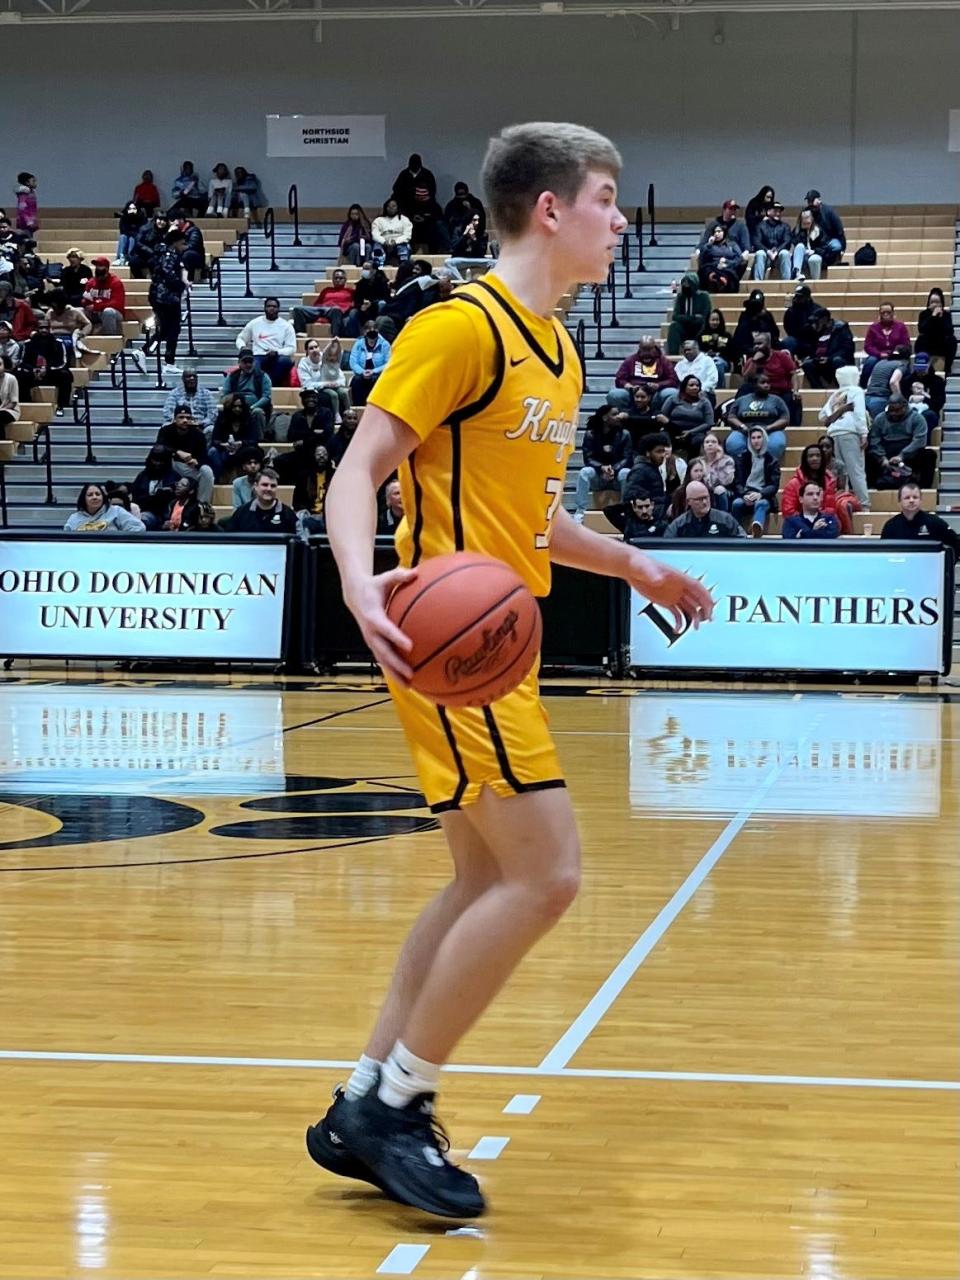 Northmor's Jax Wenger brings the ball up the court during a Division IV boys basketball district championship game against Patriot Prep at Ohio Dominican University's Alumni Hall Friday night.